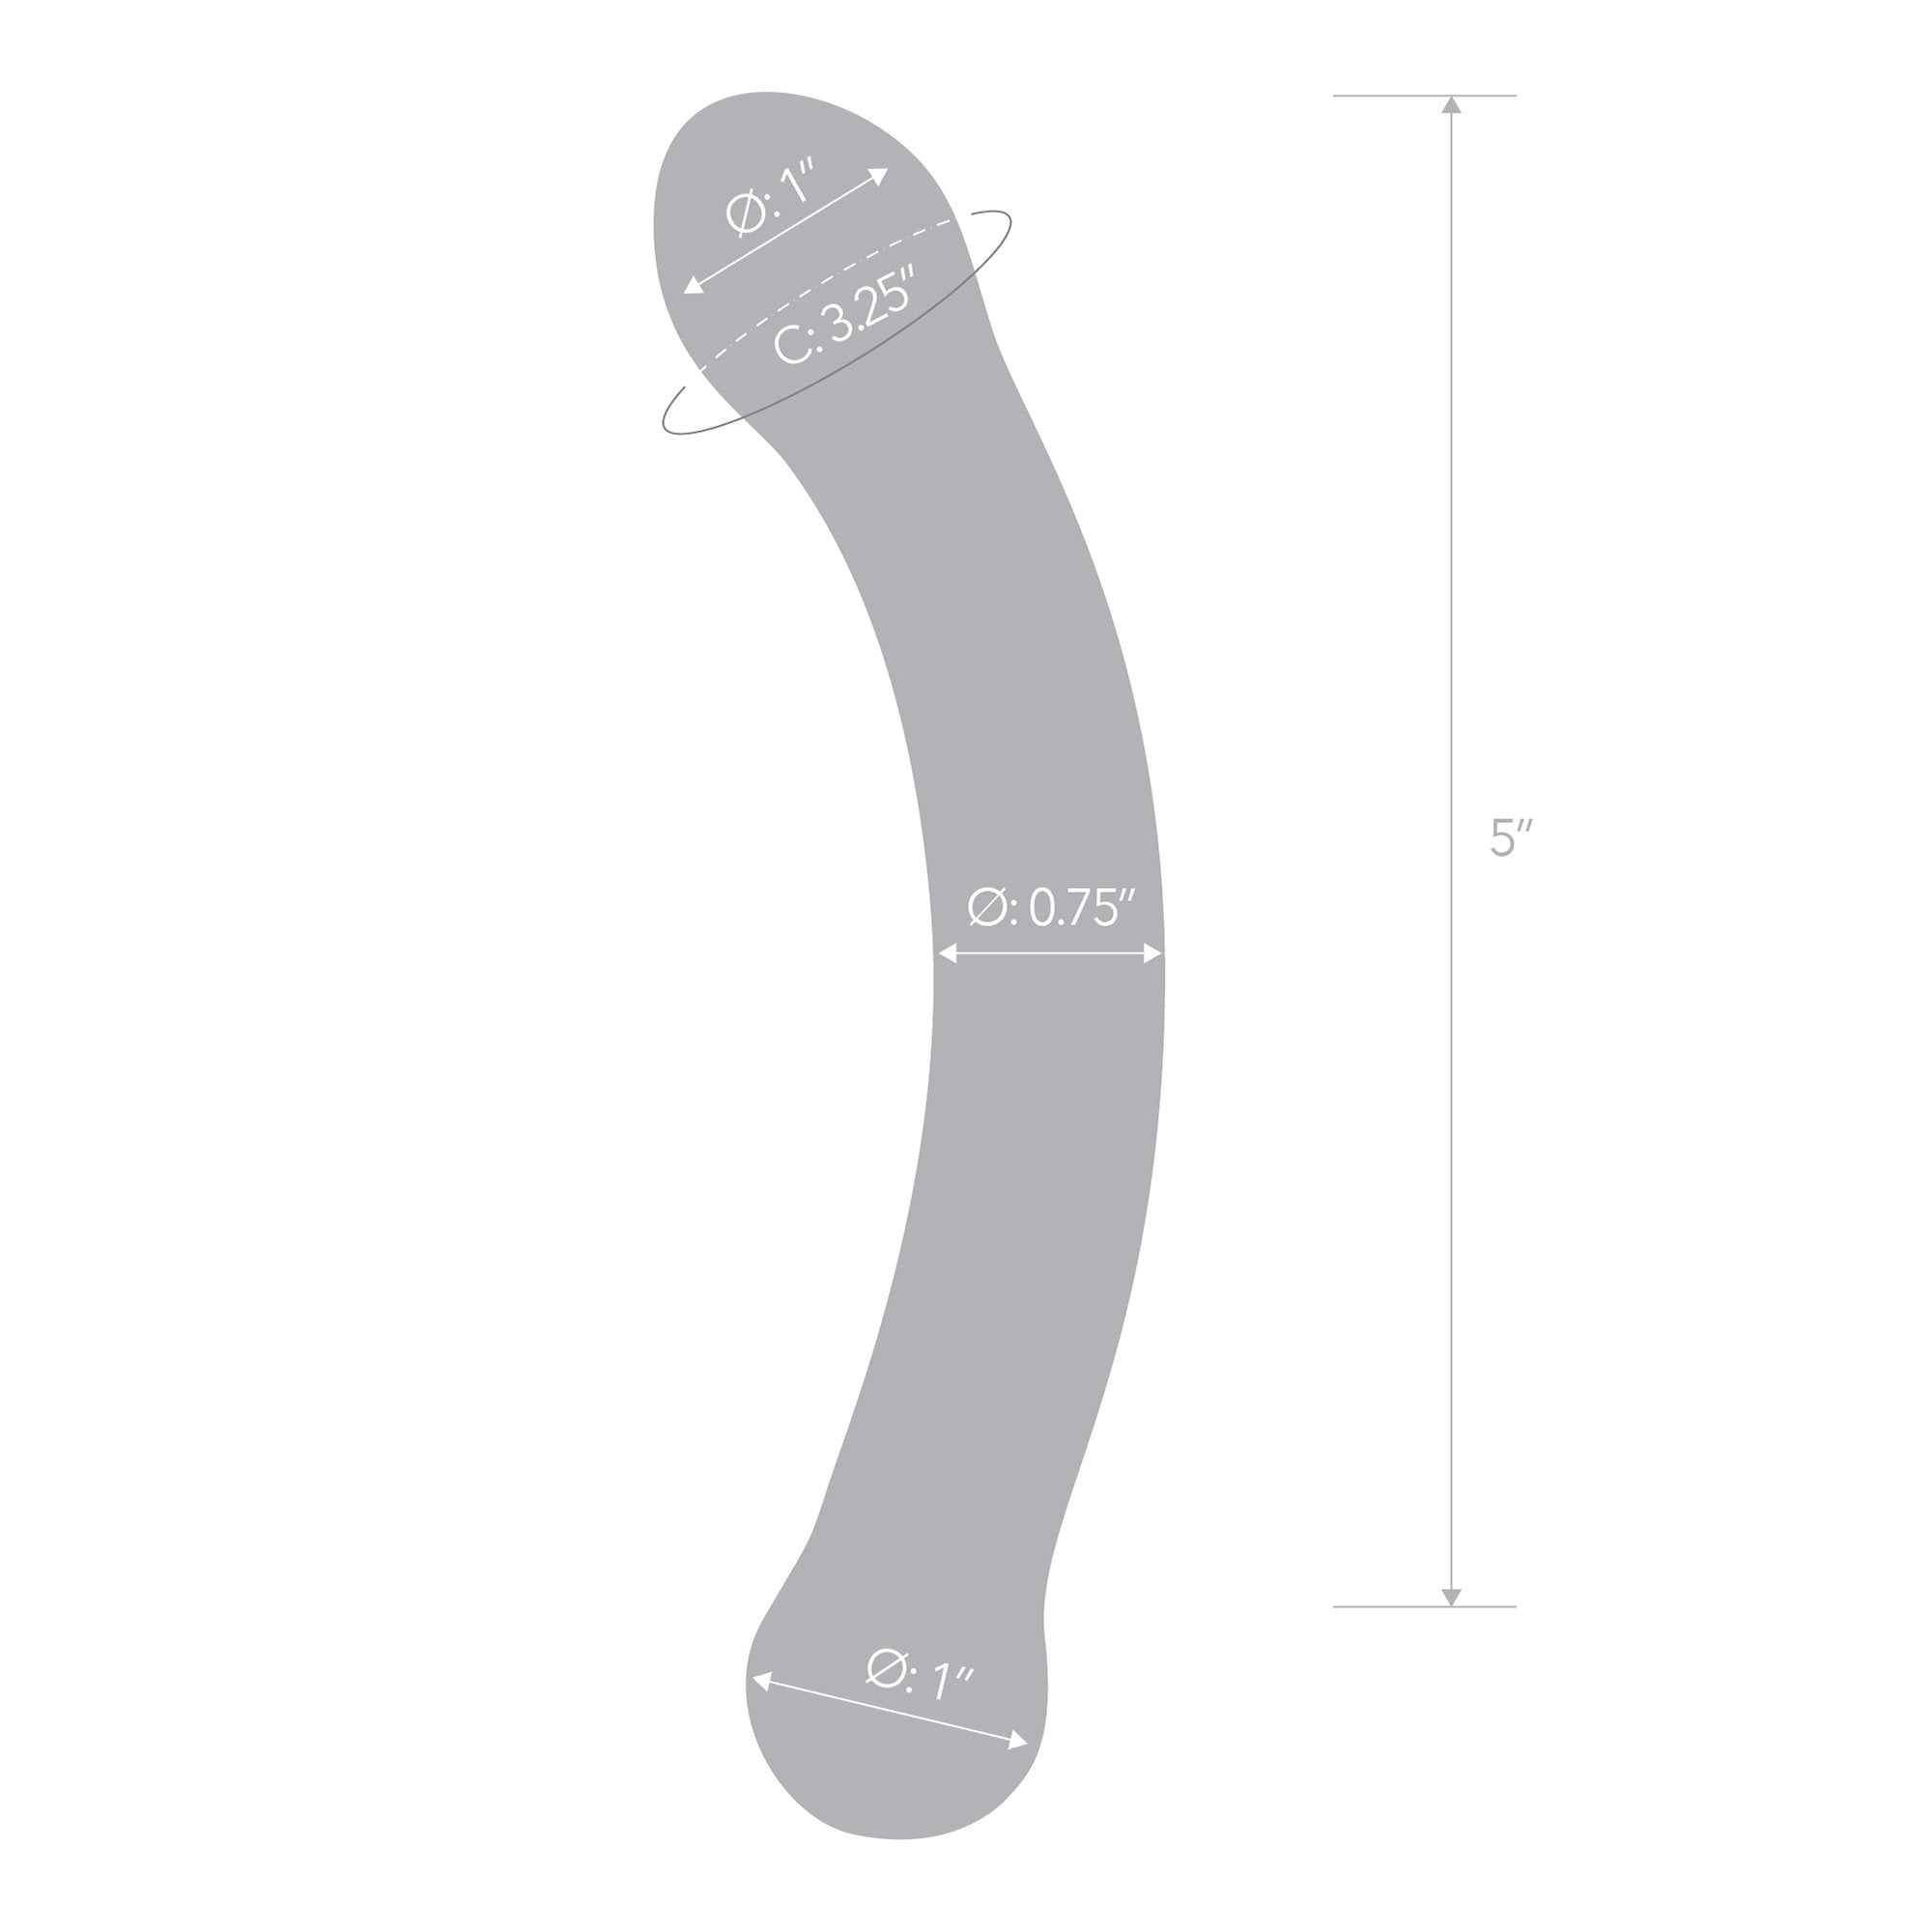 Specifications of the Gläs 6 inch Curved G-spot Blue Glass Dildo